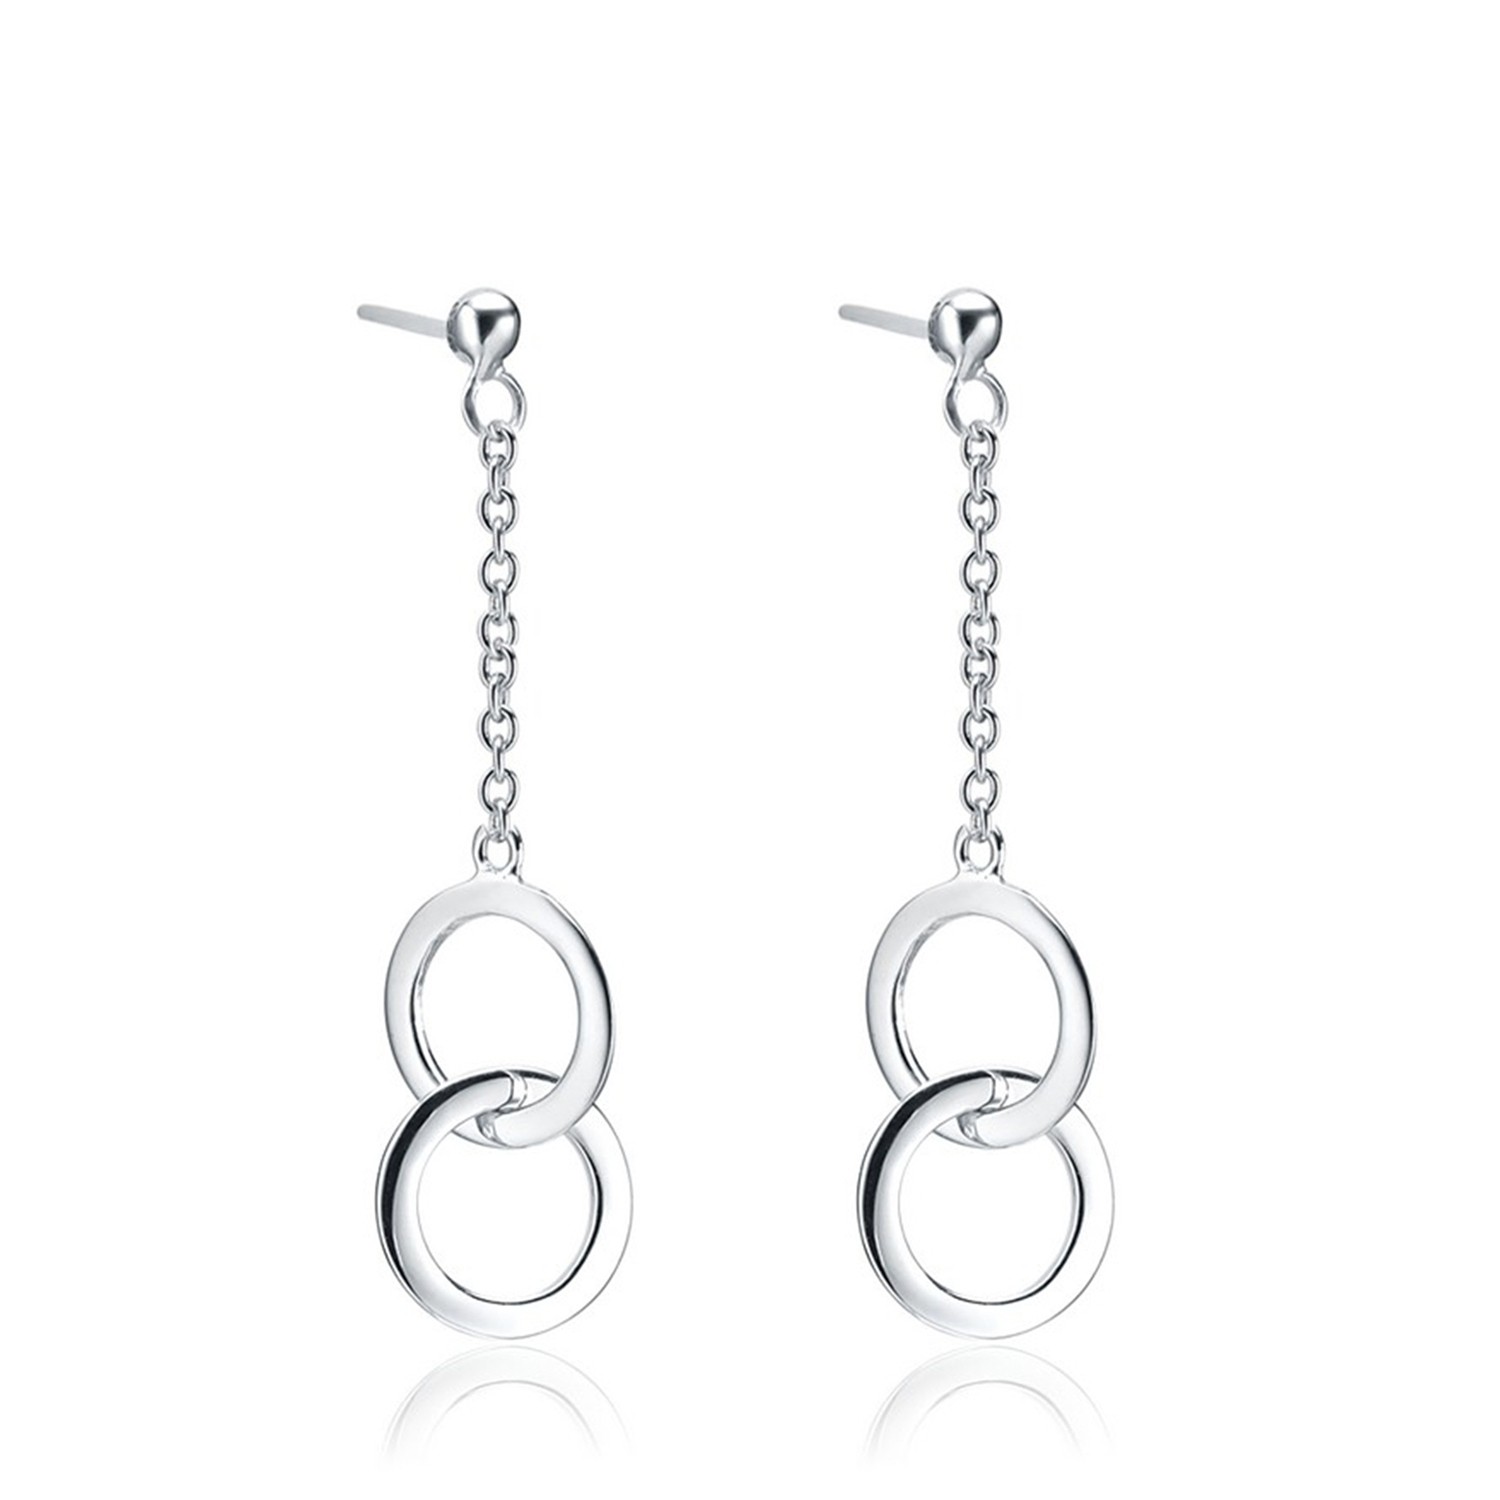 2021 New Design Minimalist 925 Sterliing Sliver Women Gift Long Drop Two Circle Erring Jewelry